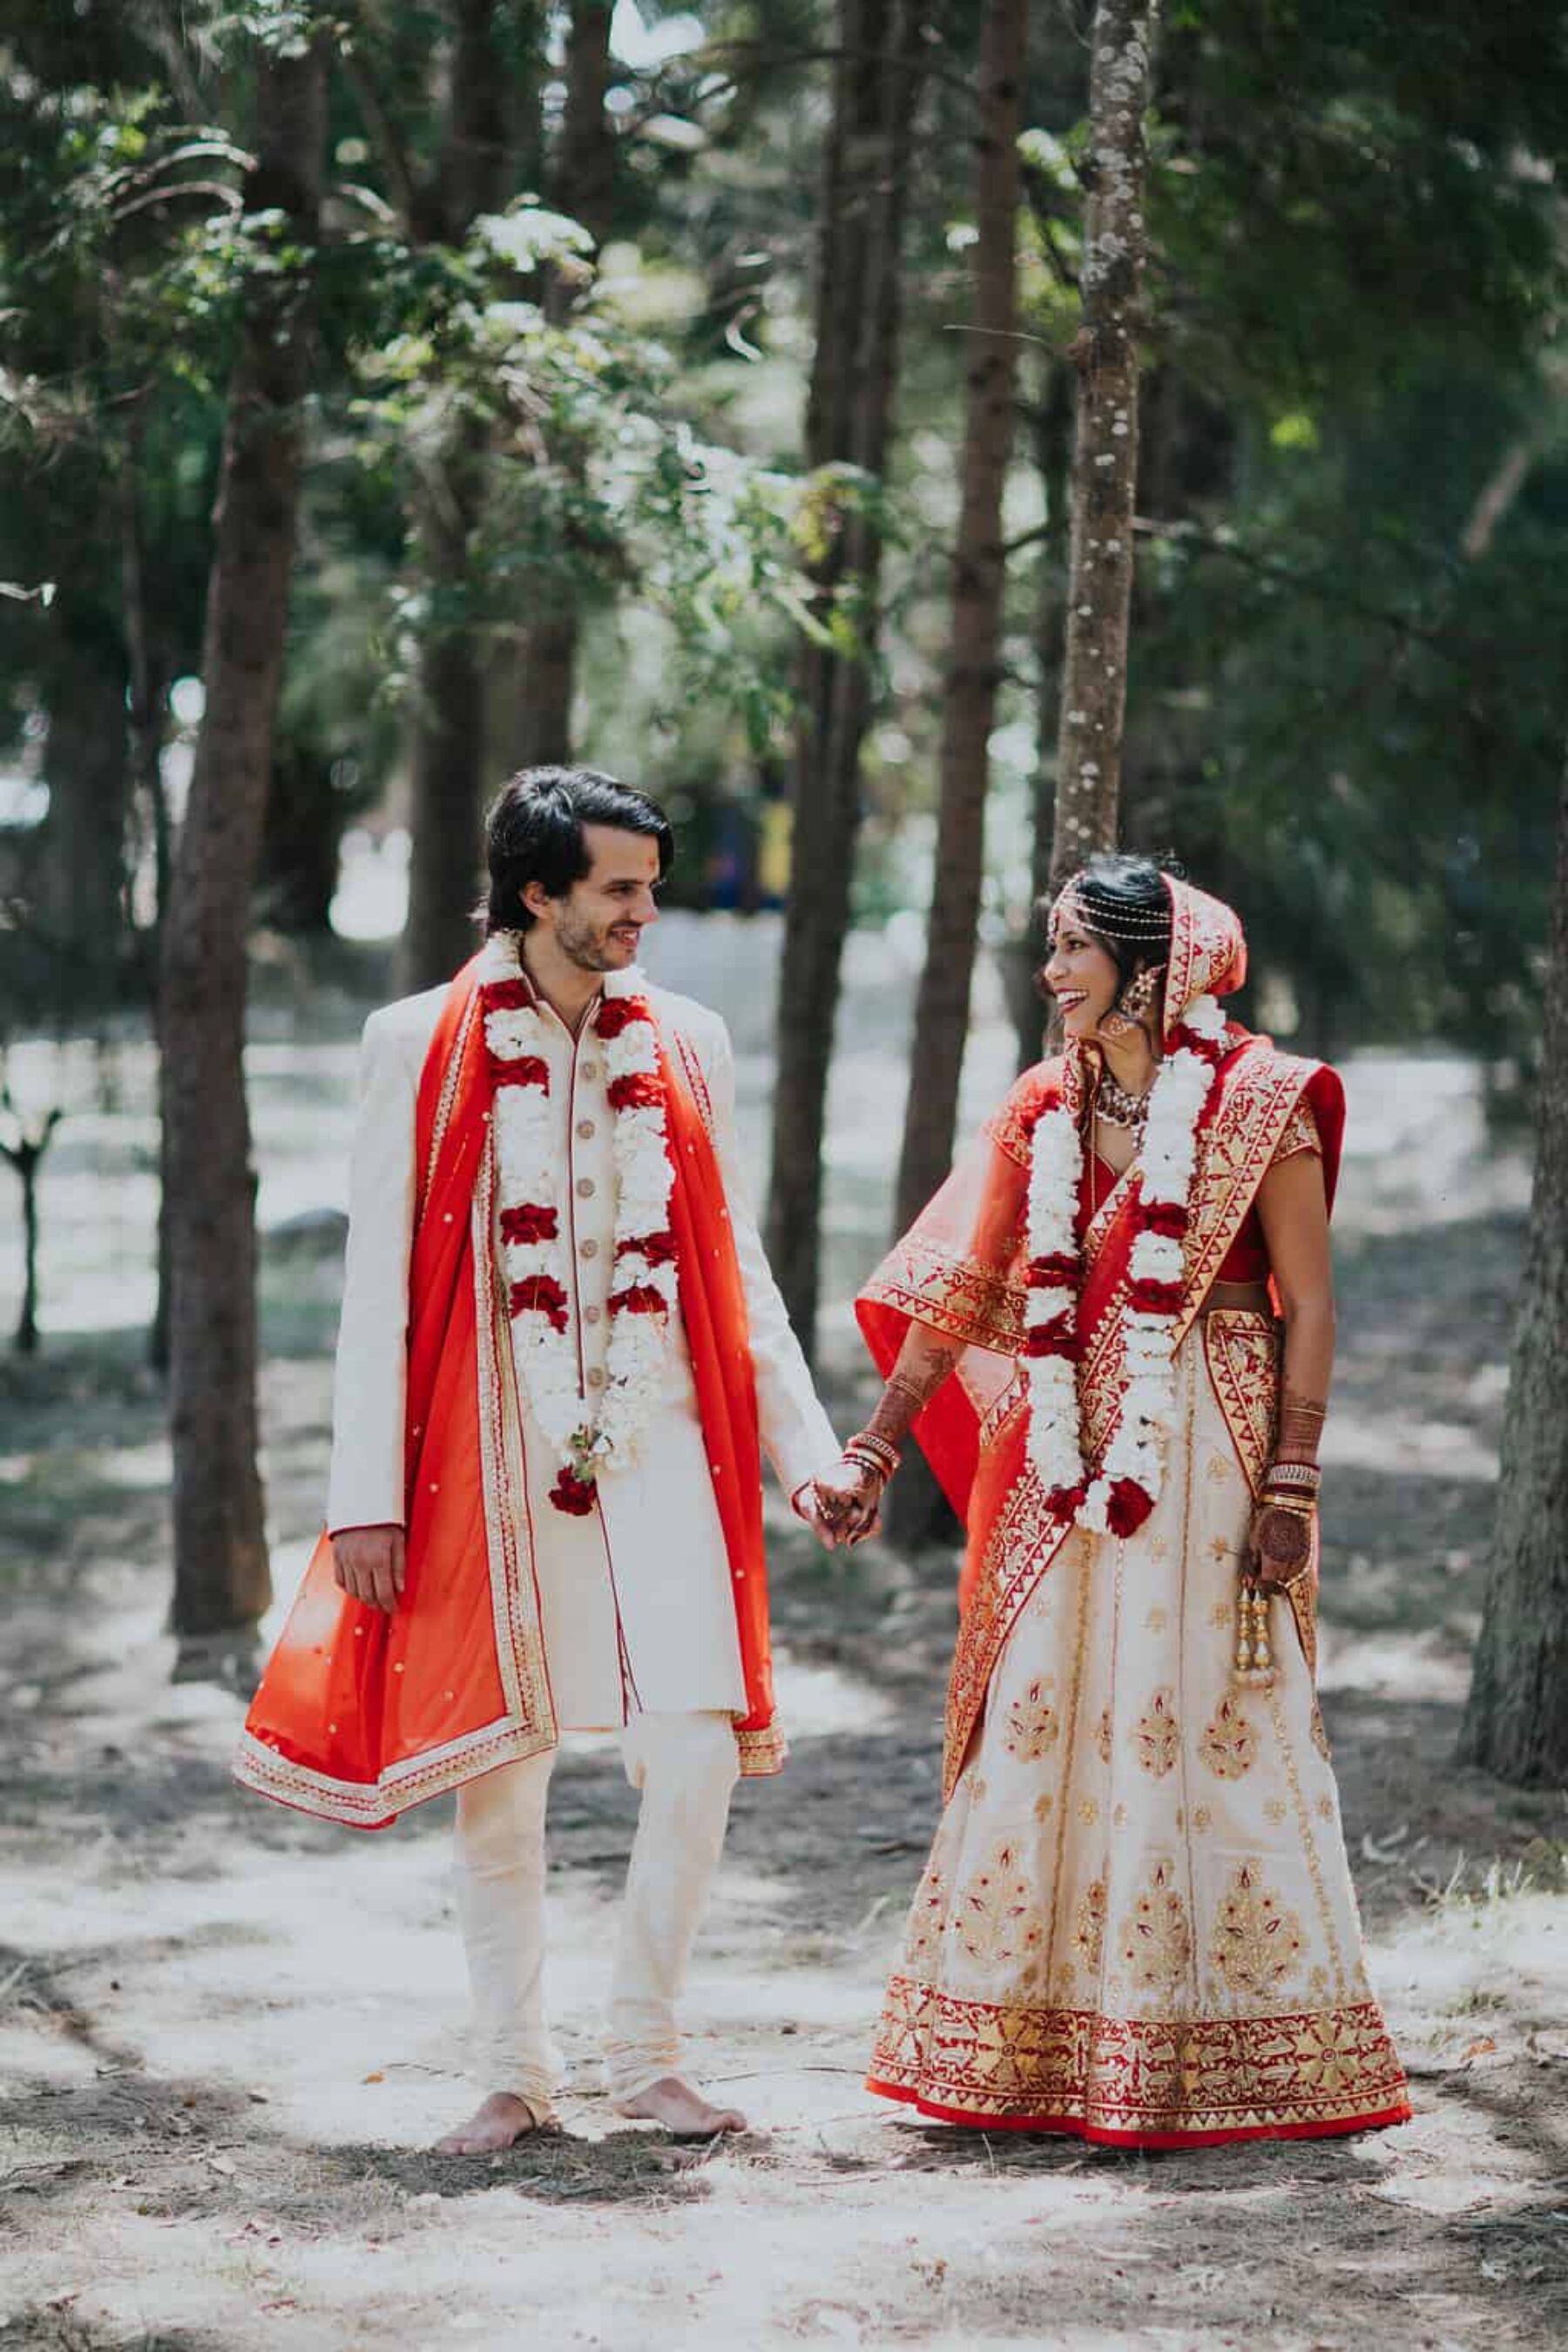 Hindu bride and groom in vibrant red and gold wedding attire